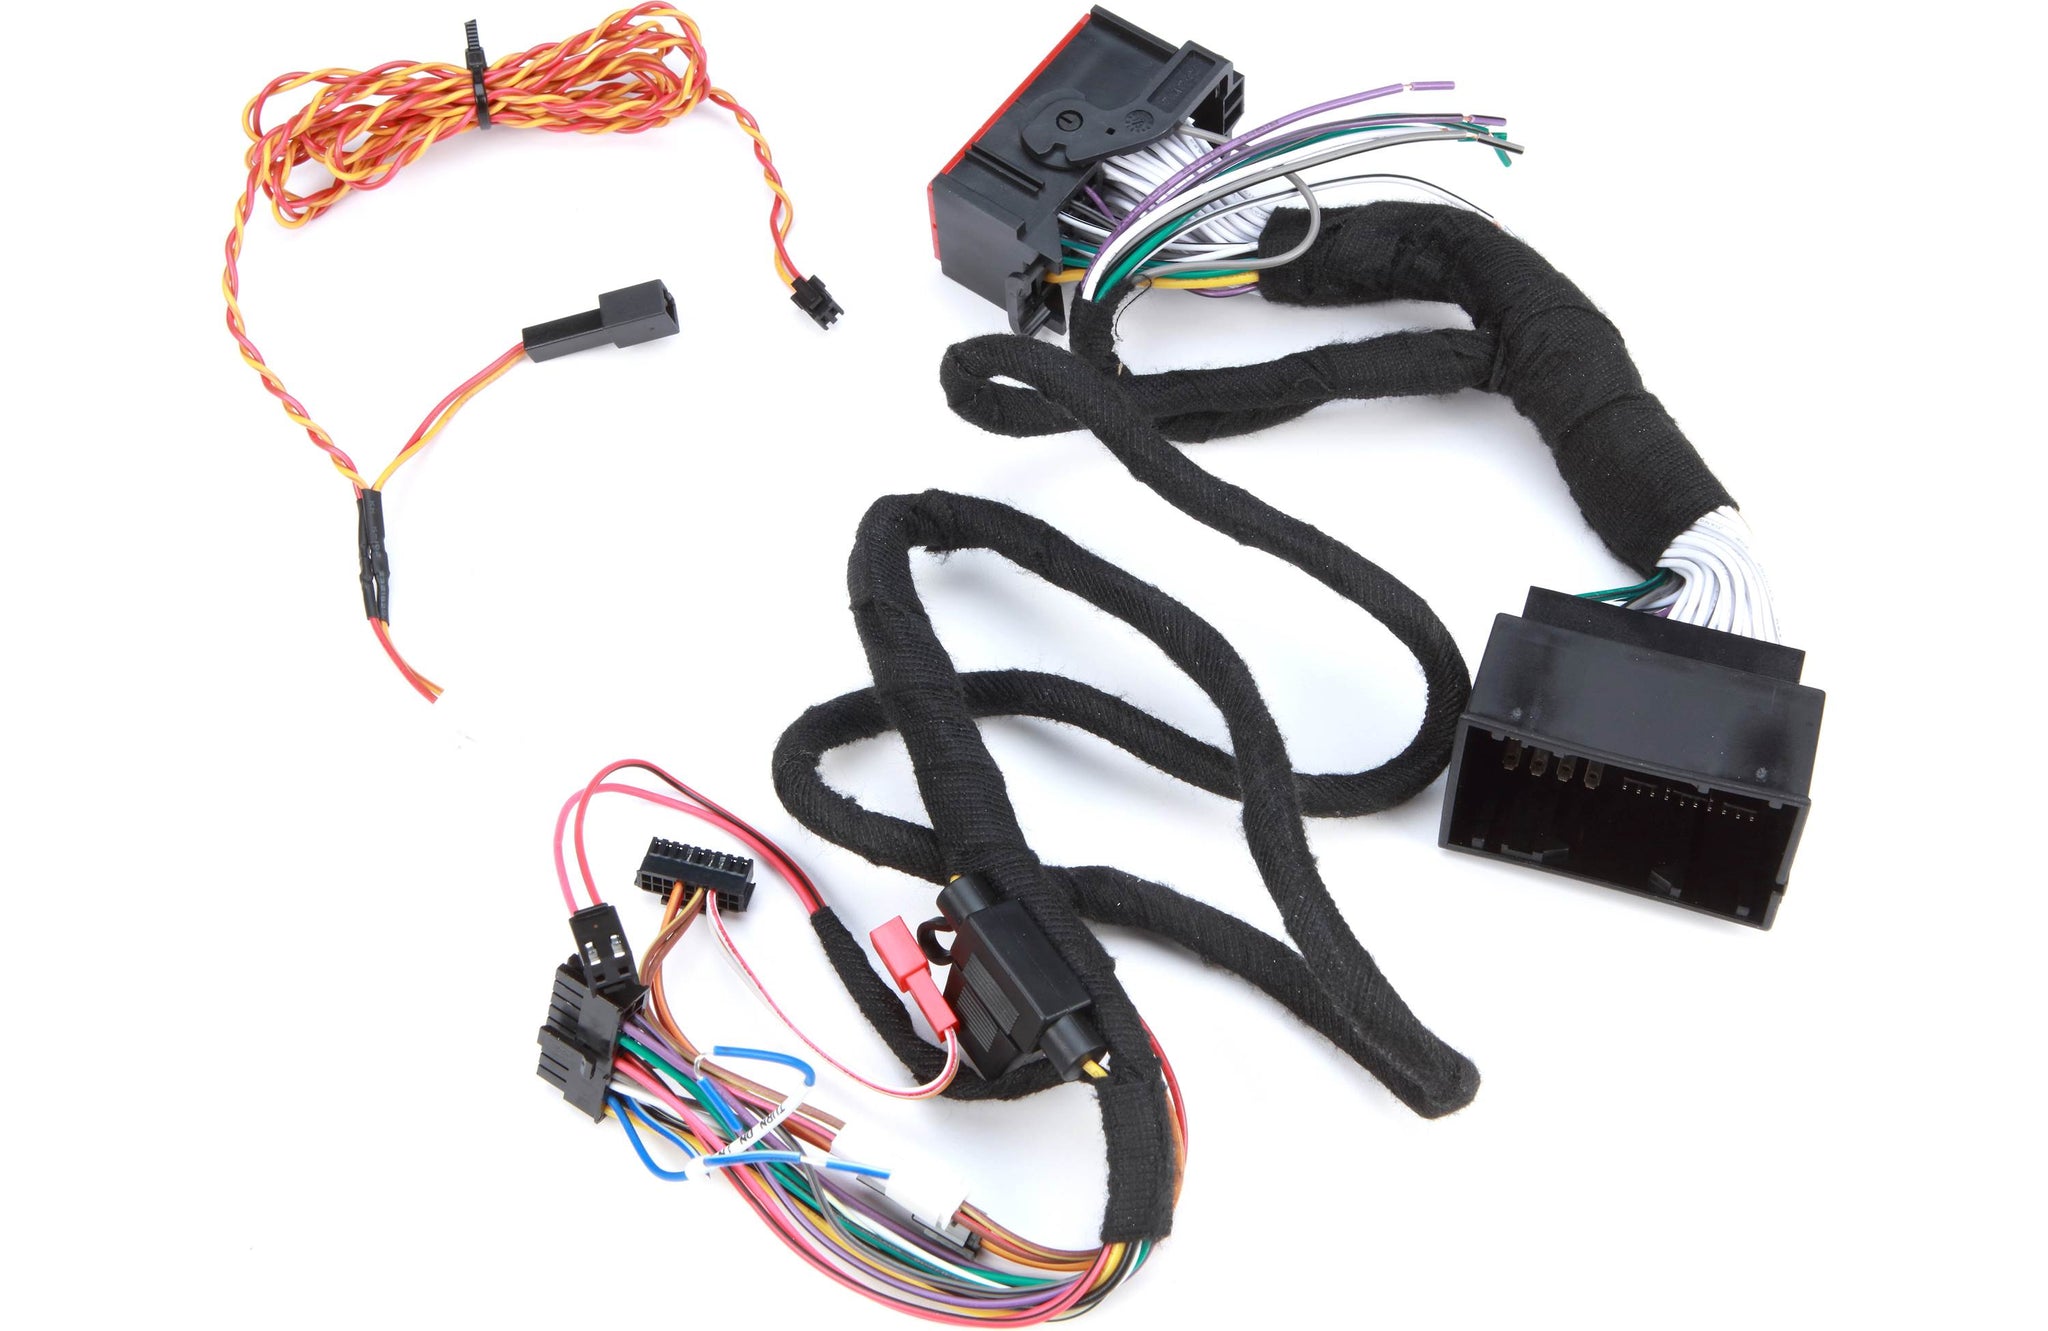 iDatalink HRN-DSP-CH3 T-harness for adding a Rockford Fosgate DSR1 processor to select 2013-up Chrysler-built vehicles without a factory amp